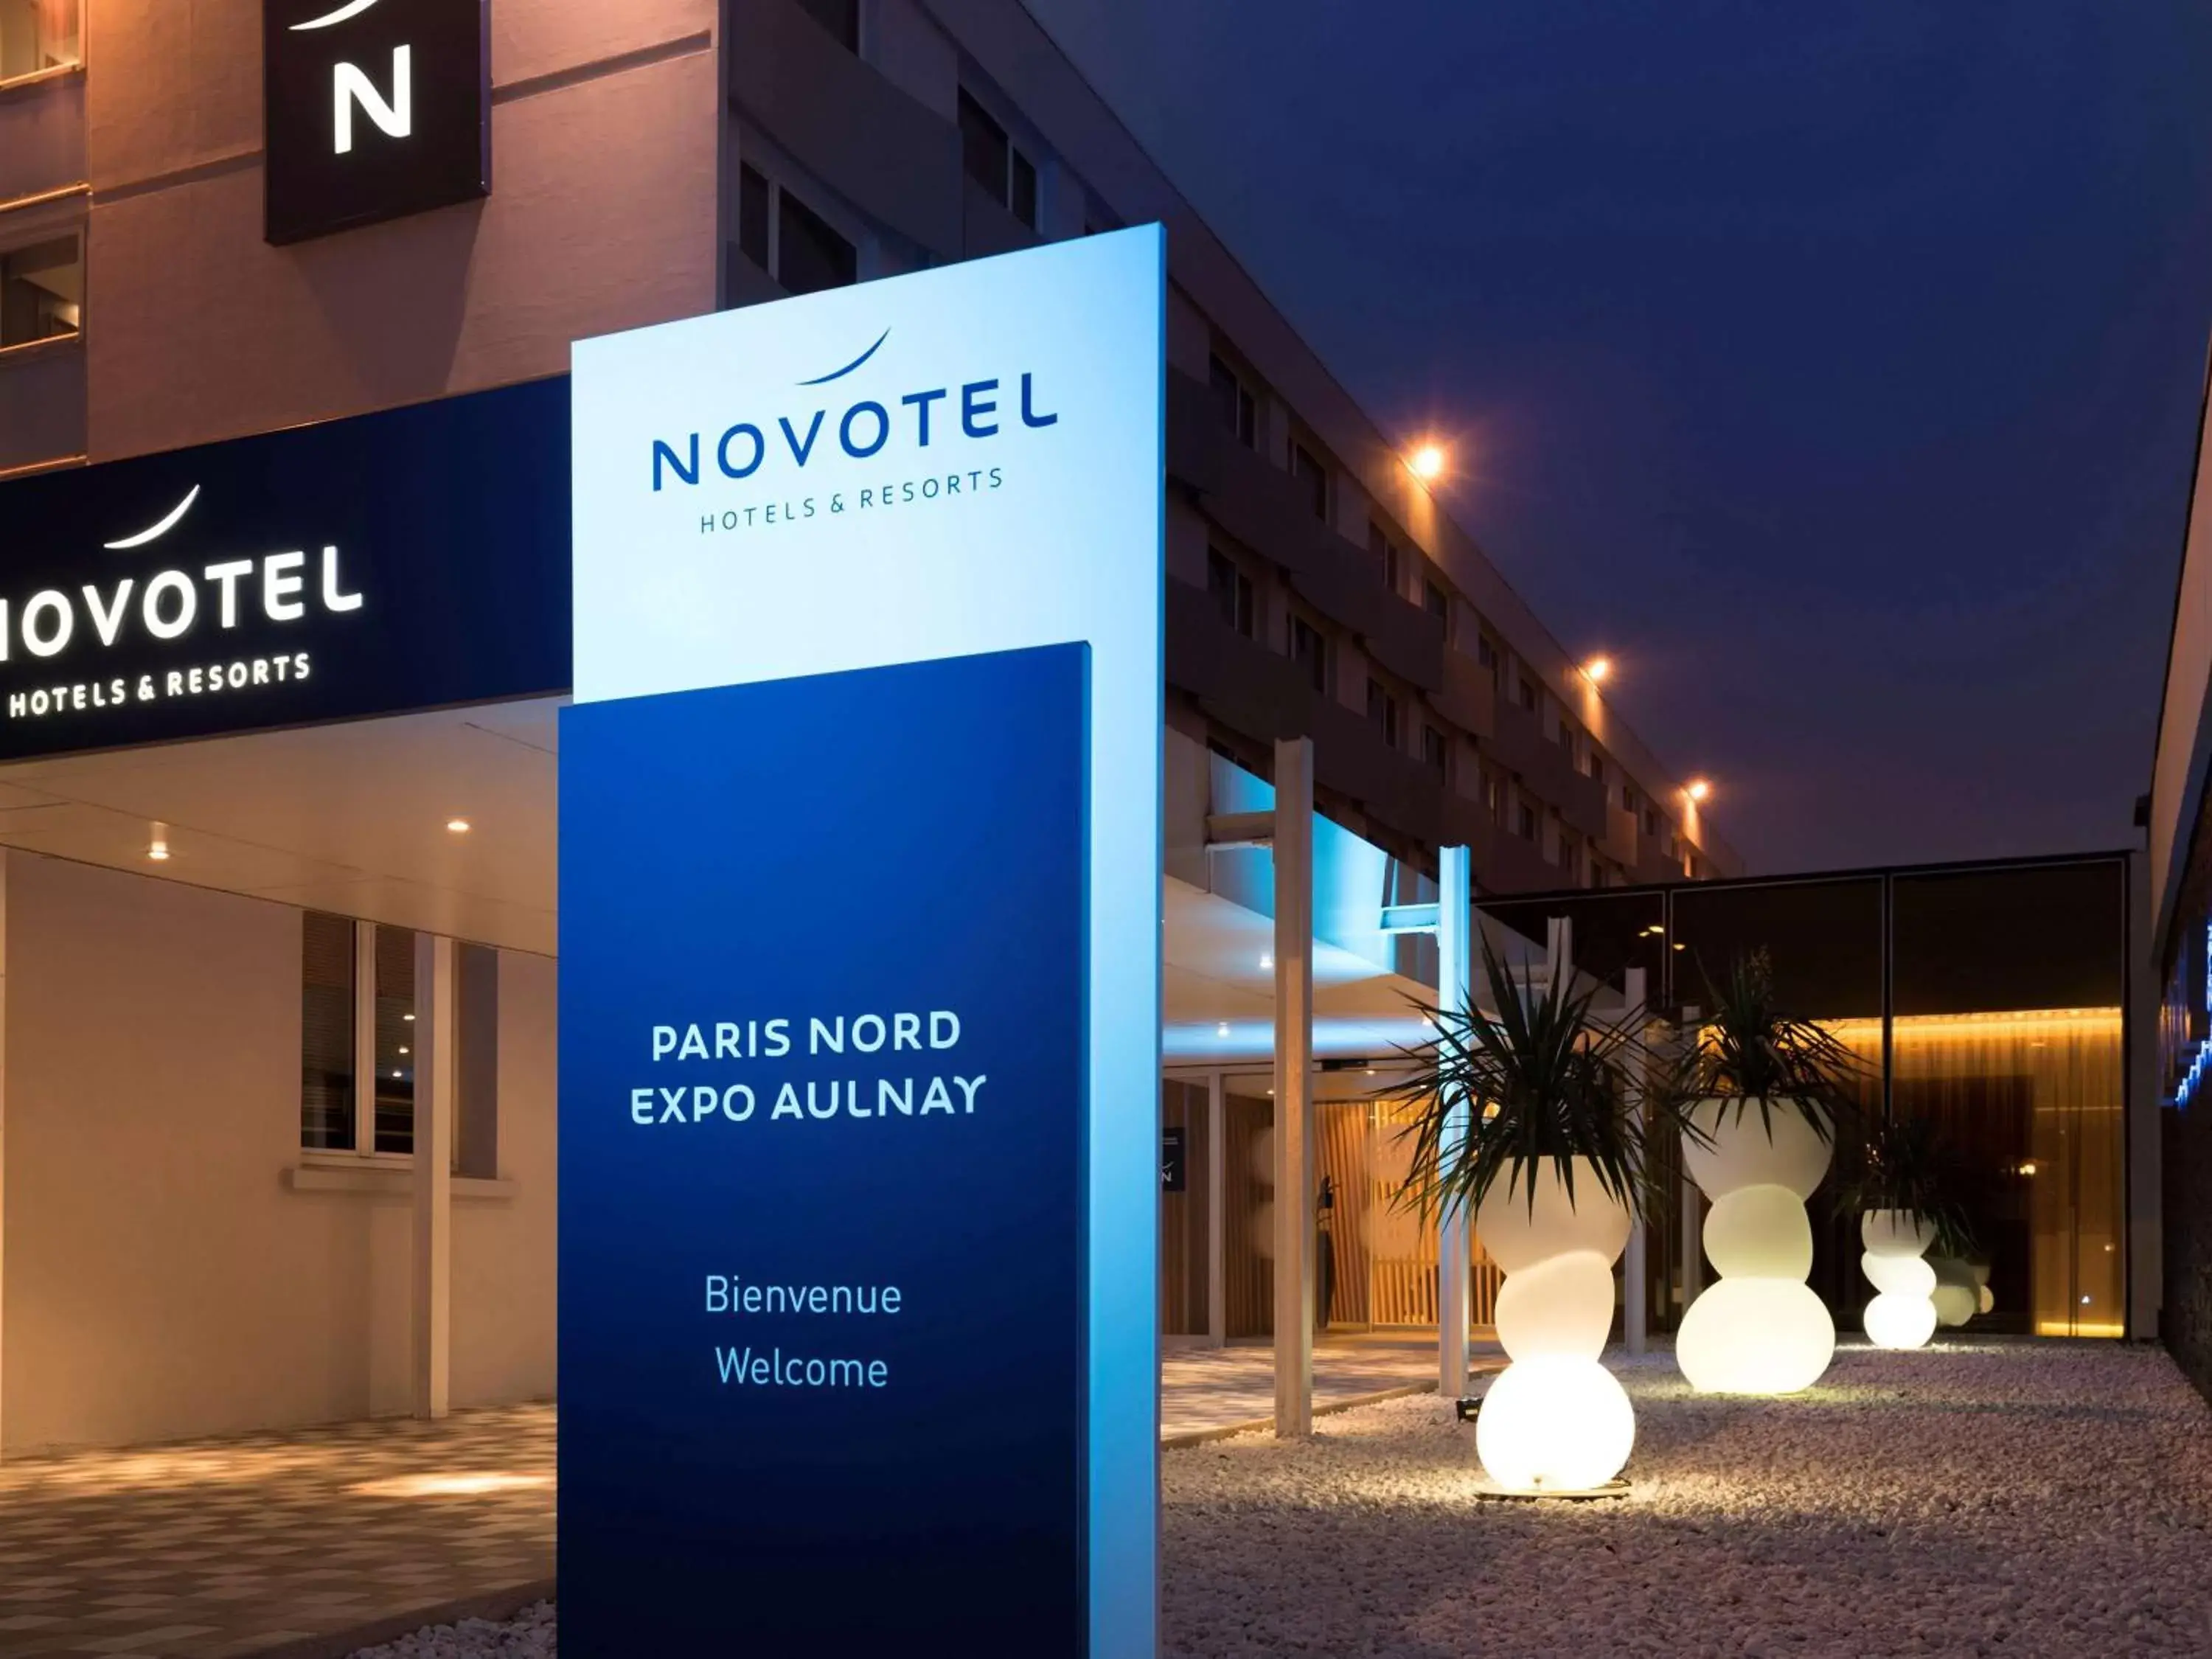 Property building in Novotel Paris Nord Expo Aulnay